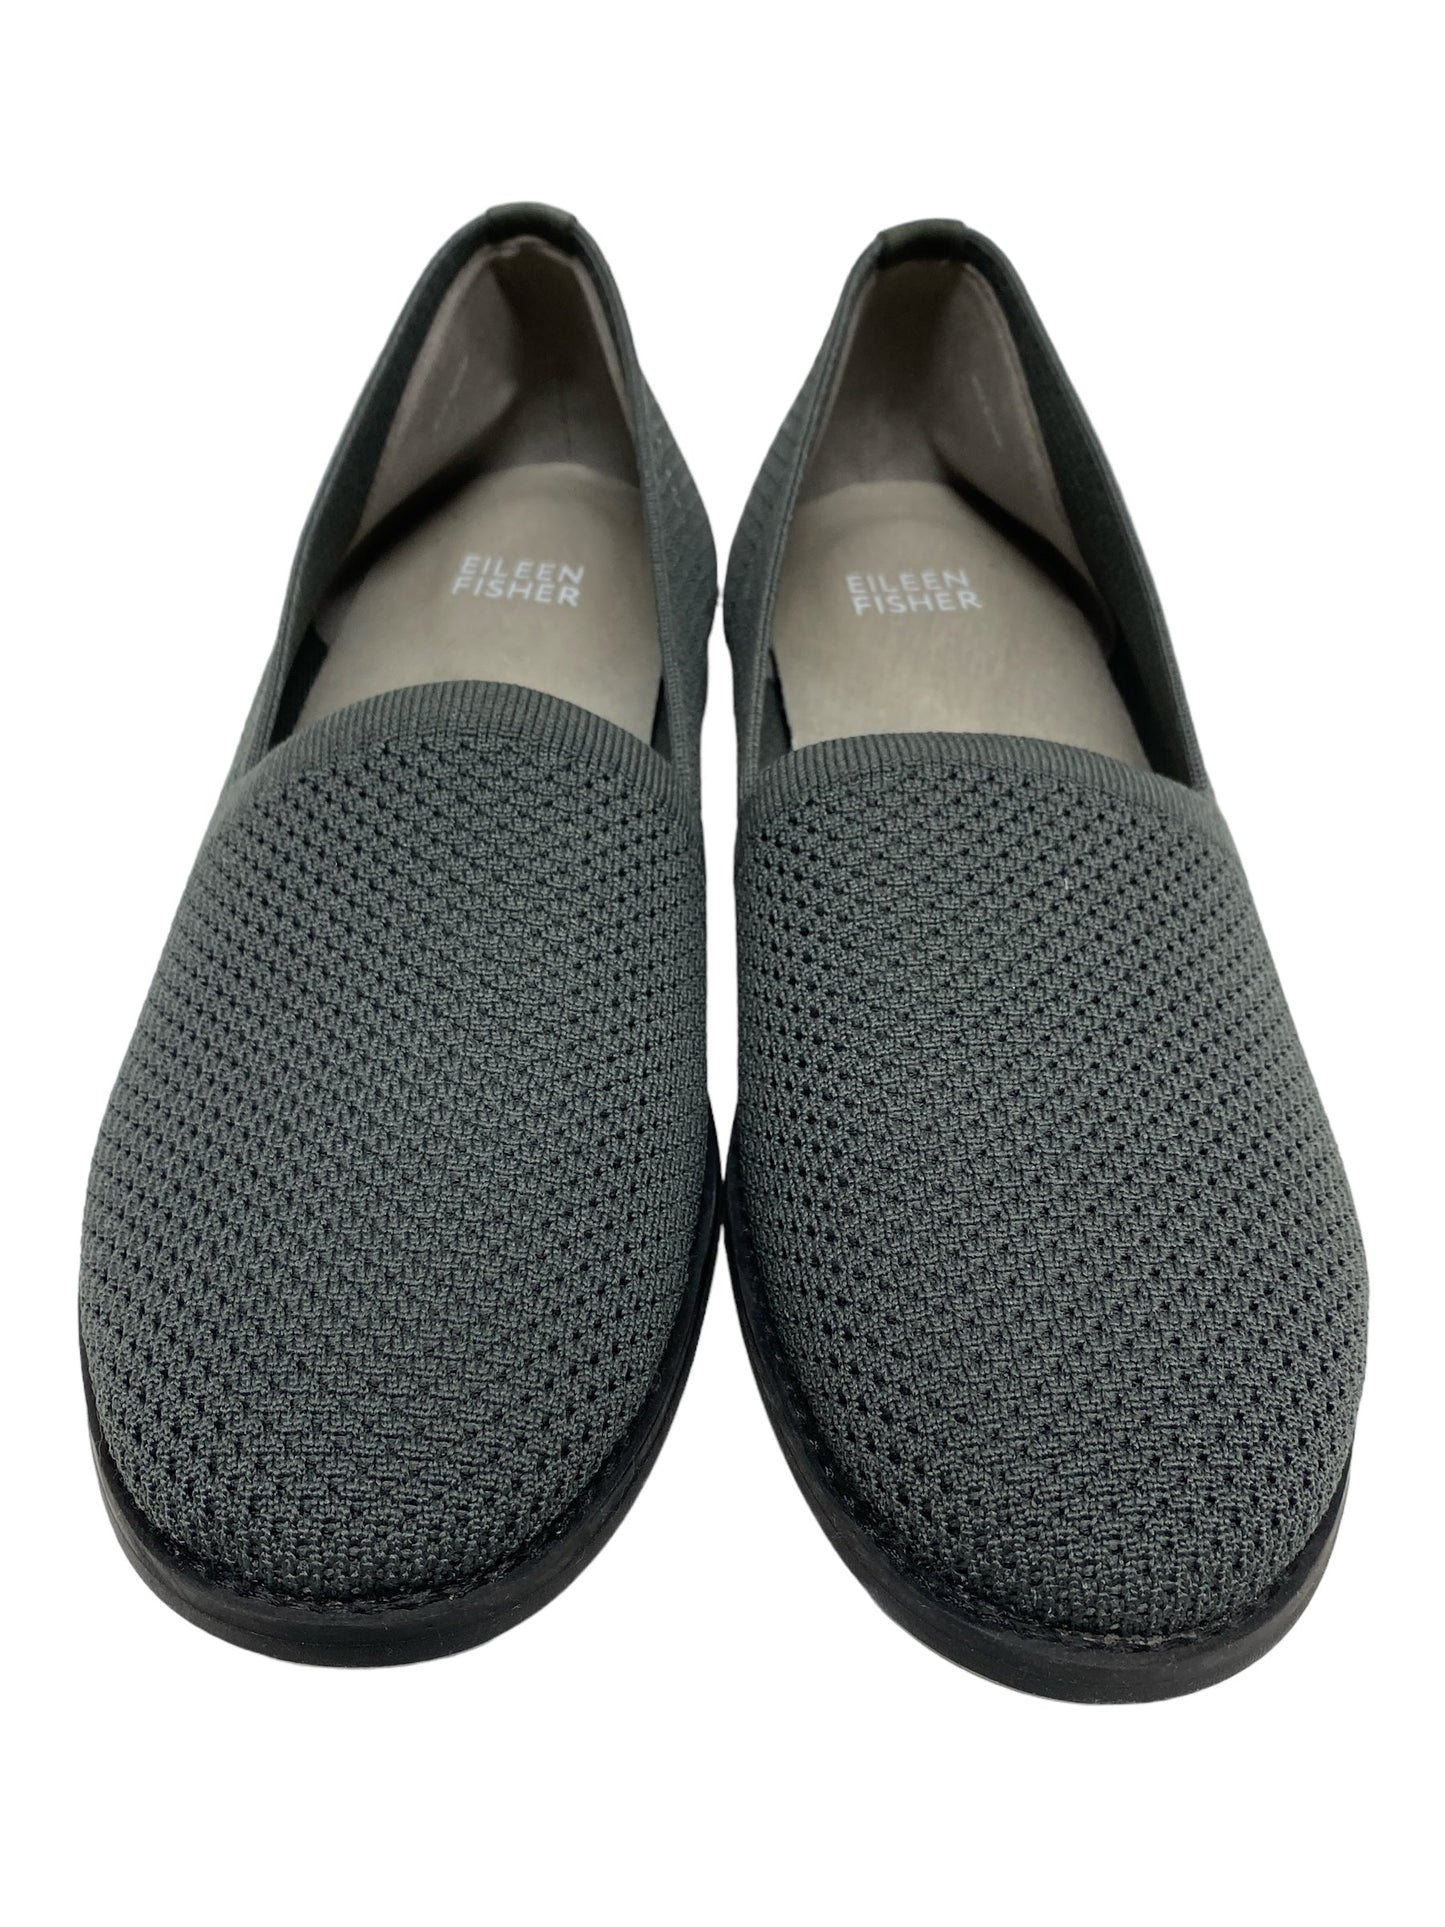 Shoes Flats By Eileen Fisher  Size: 7